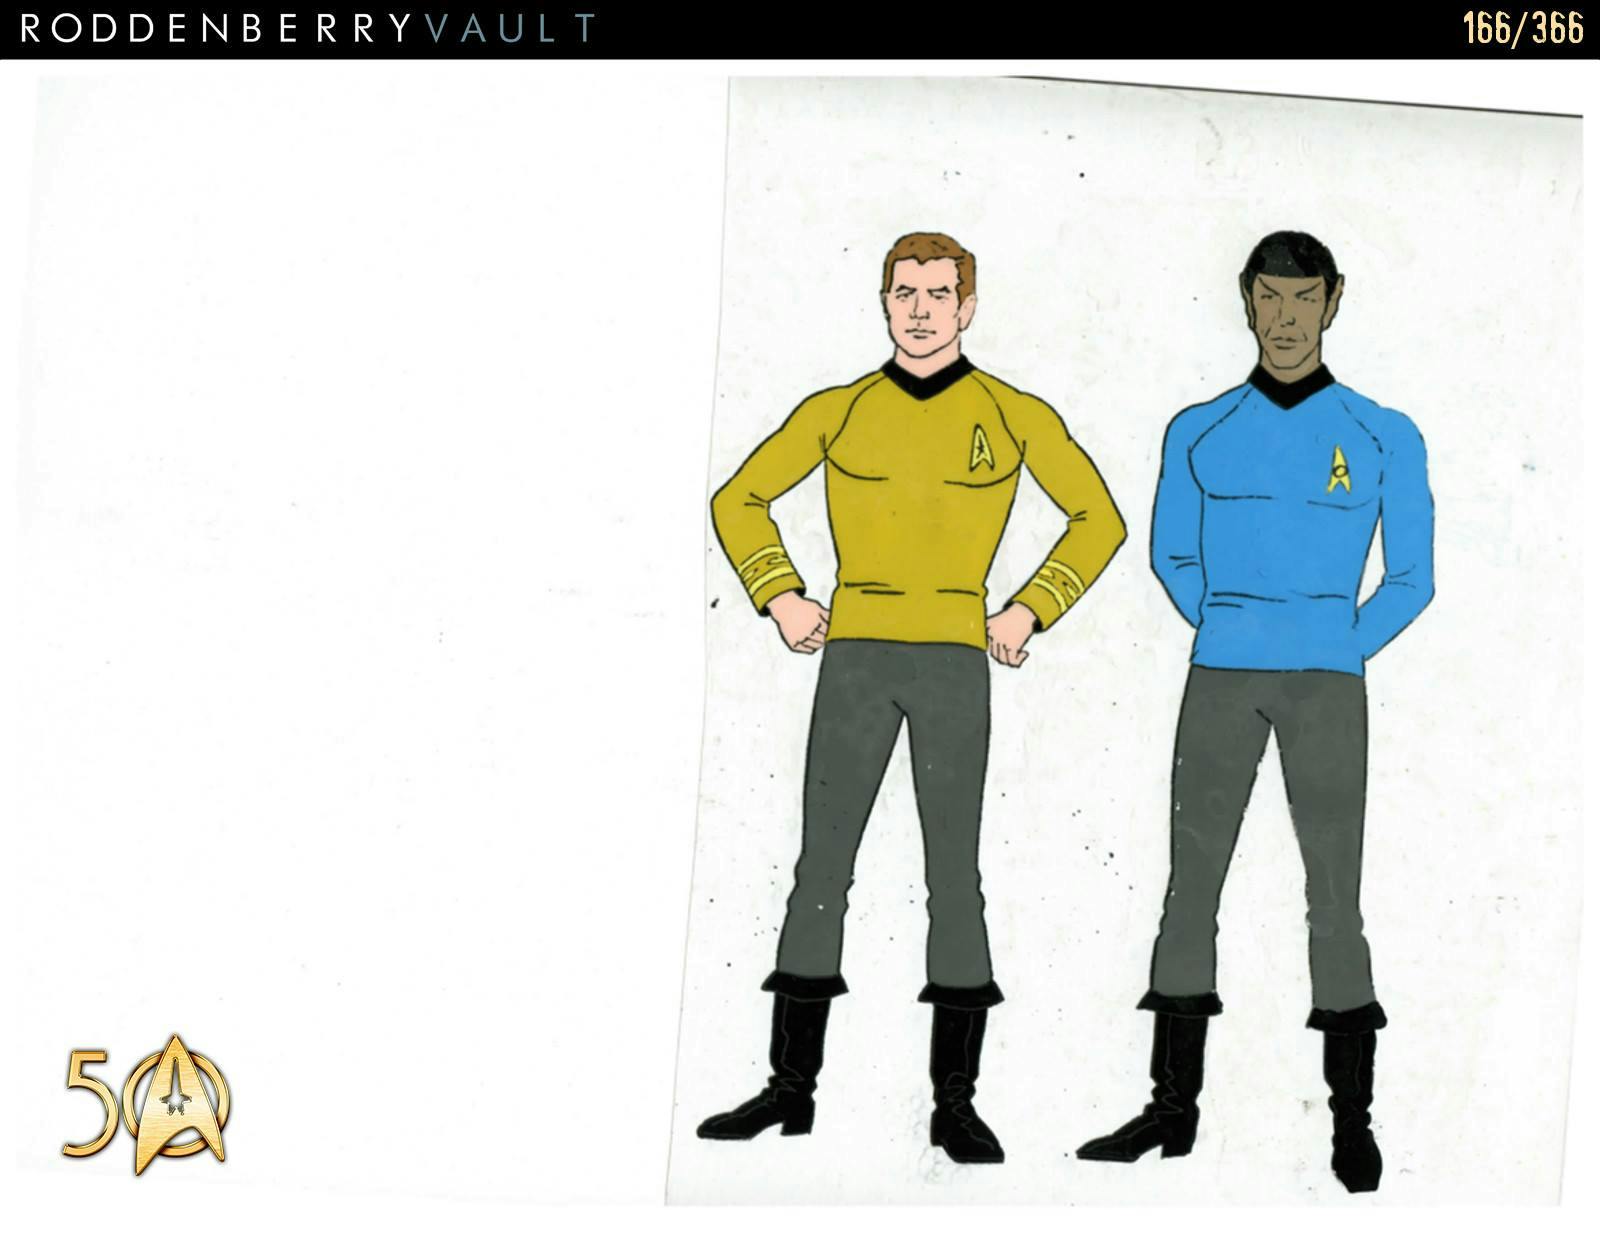 From the Roddenberry 366 Vault - The Animated Series - promotional art of Captain Kirk and Spock